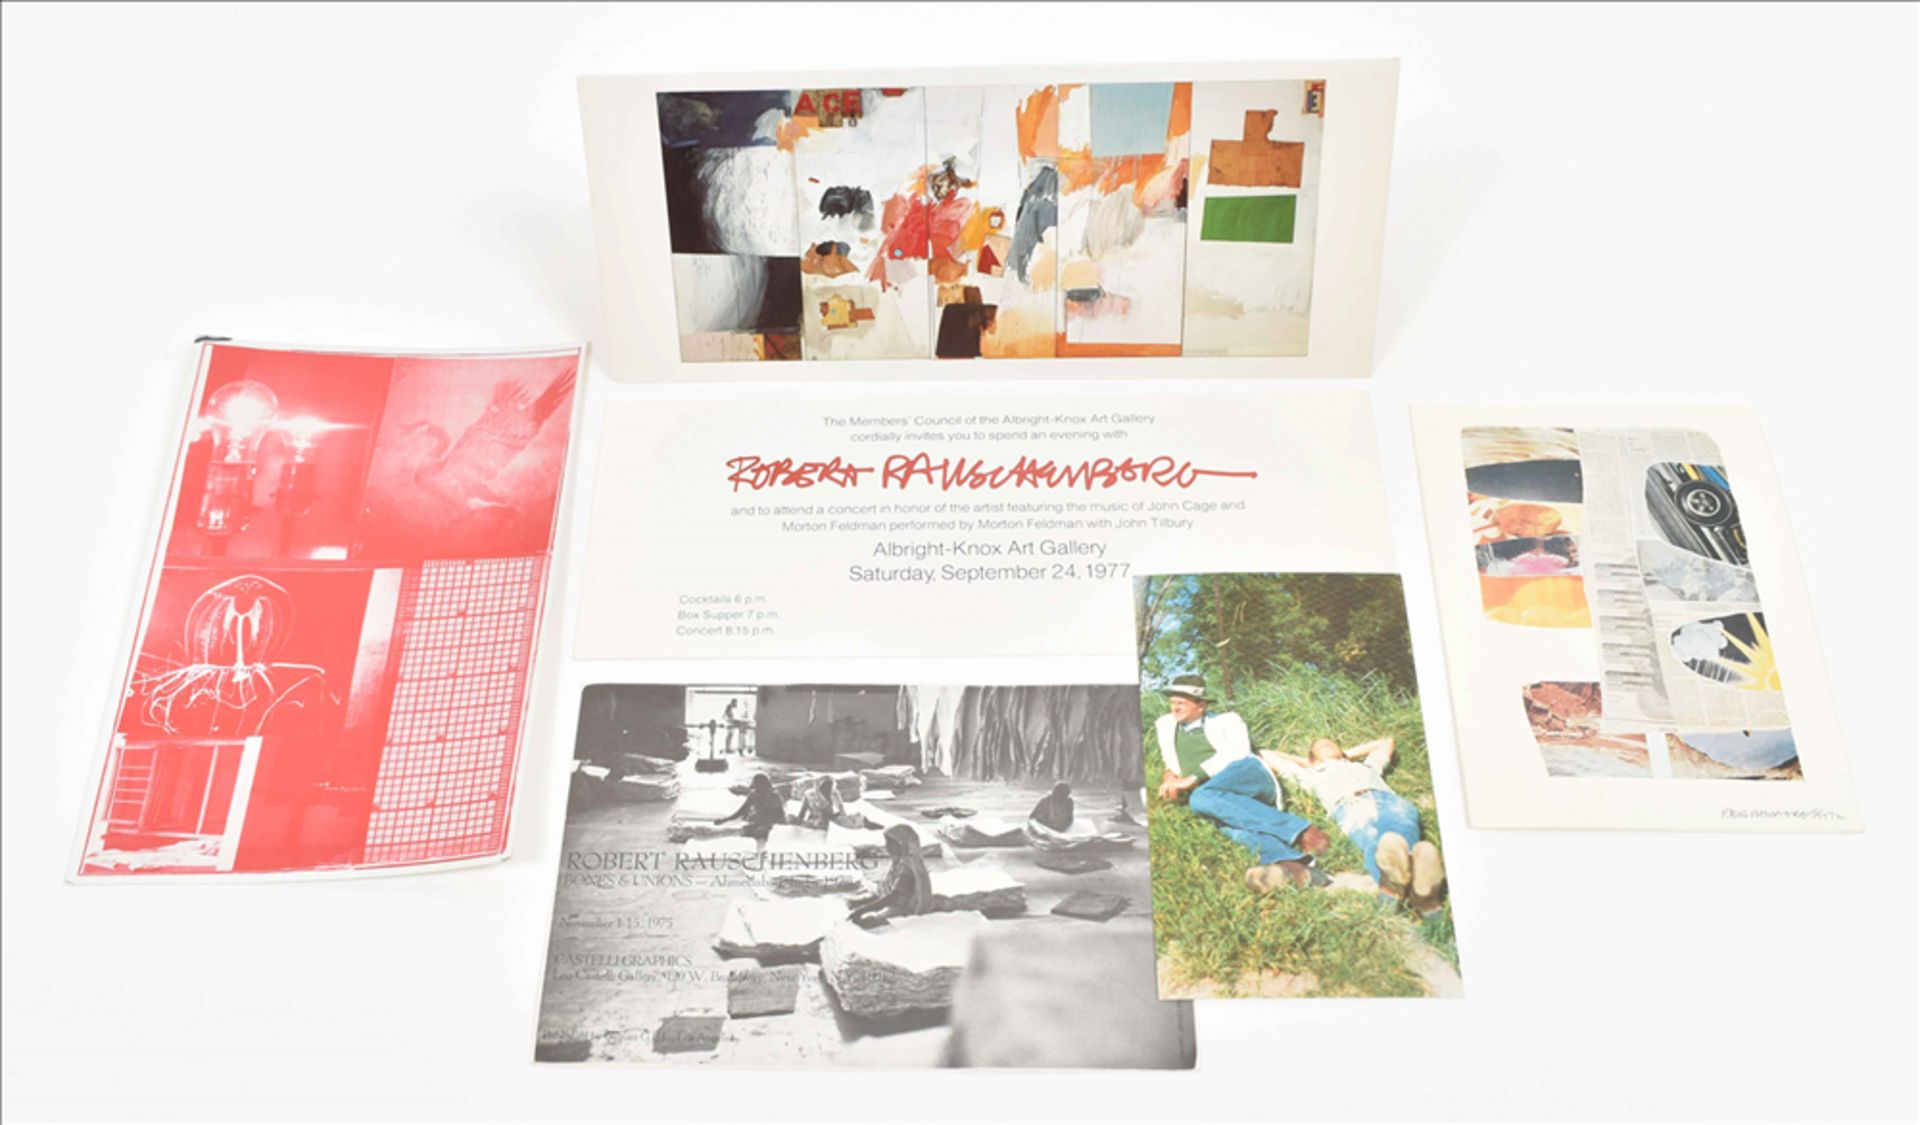 Robert Rauschenberg, announcement cards and posters - Image 7 of 9